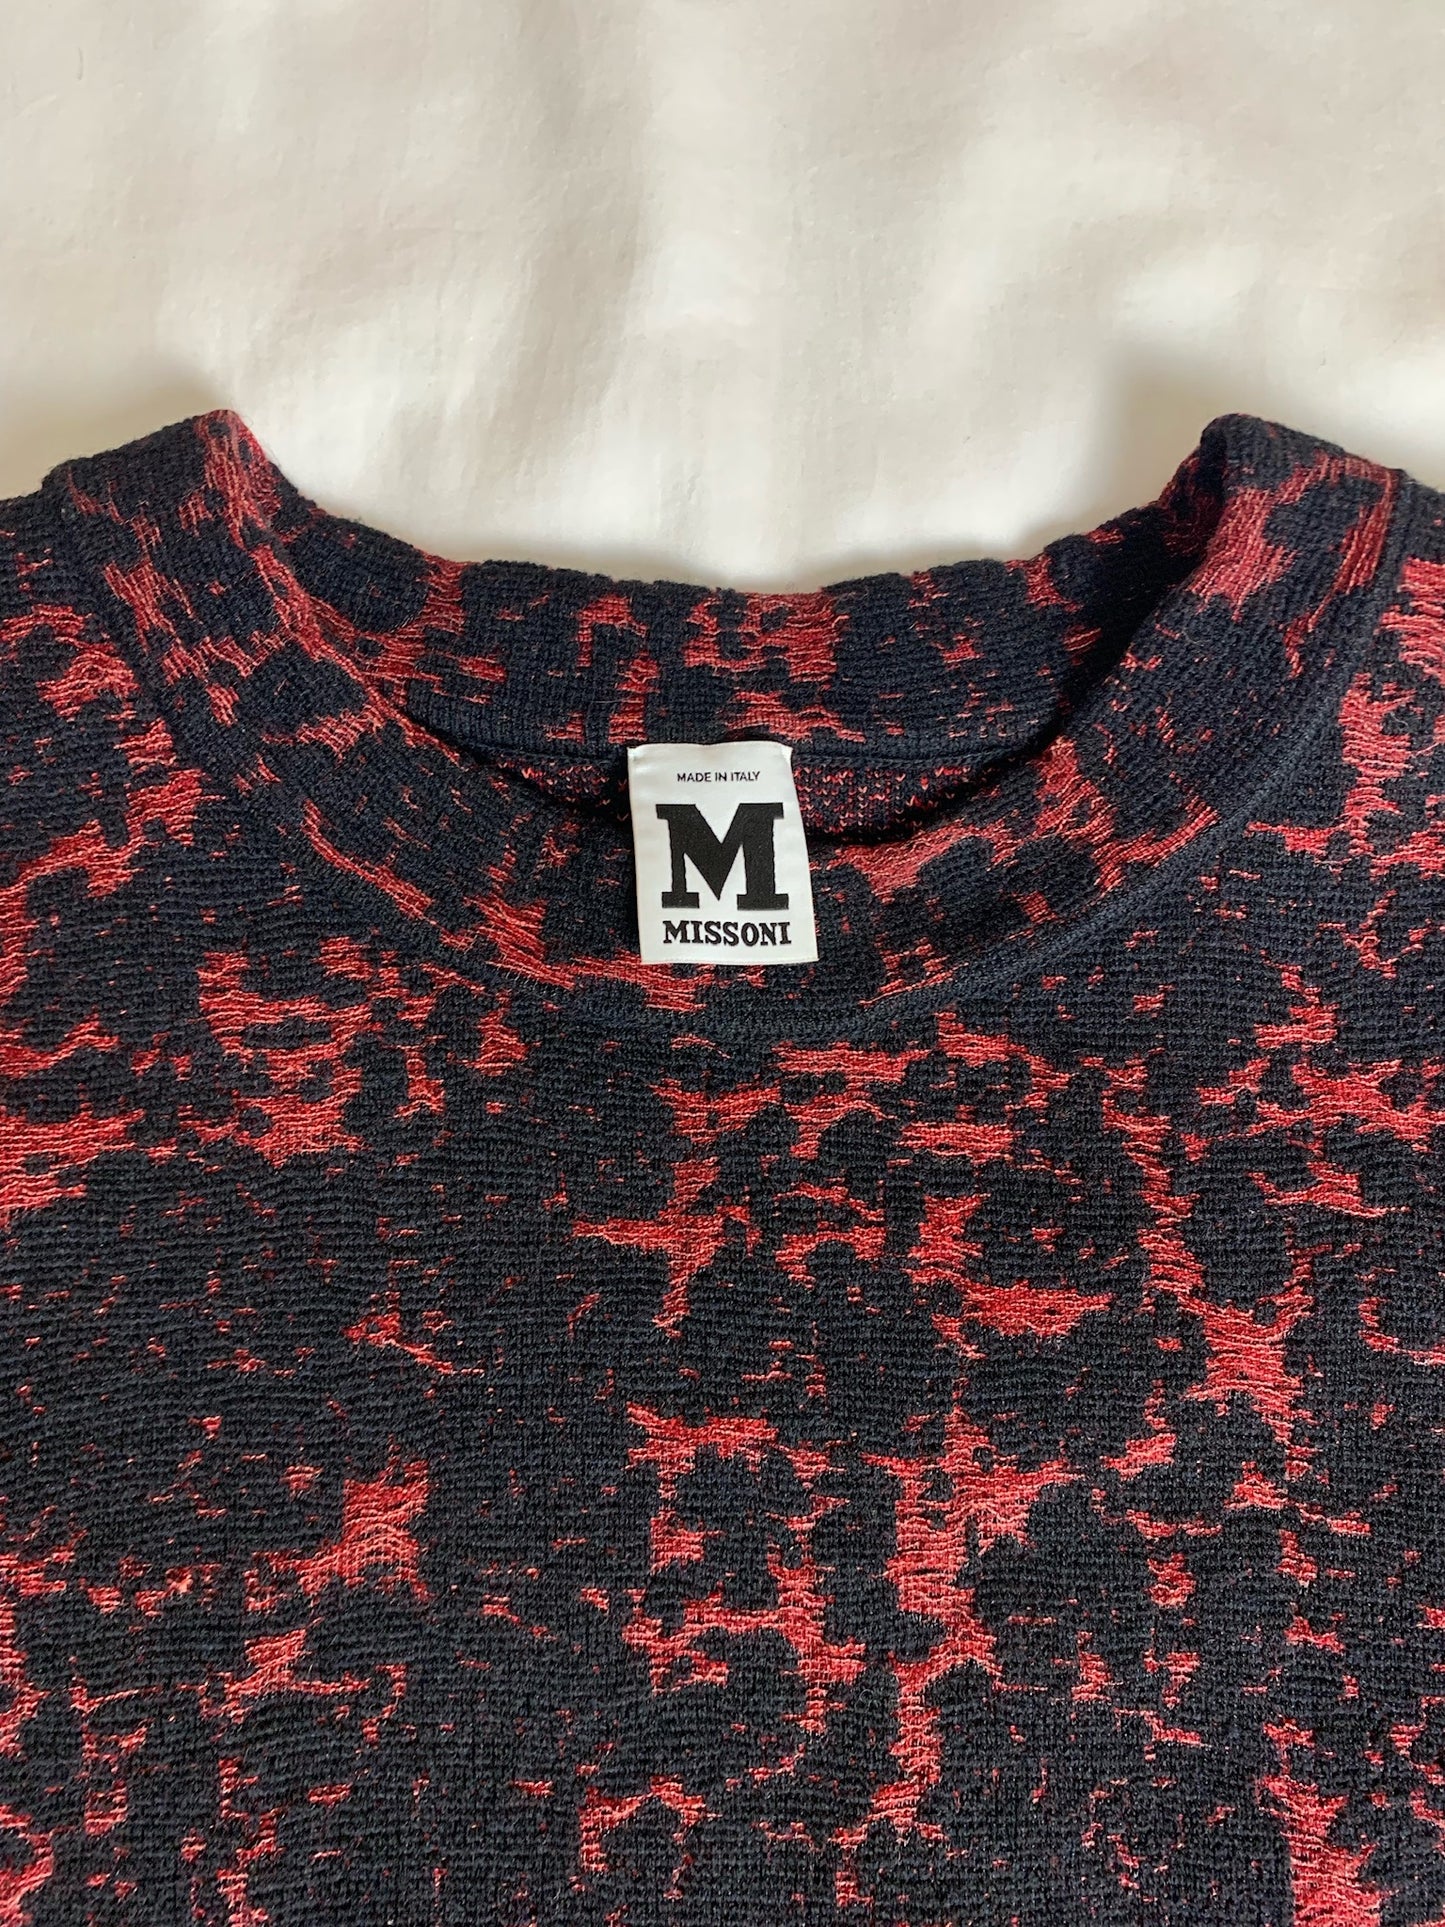 M Missoni Black and Red Sweater